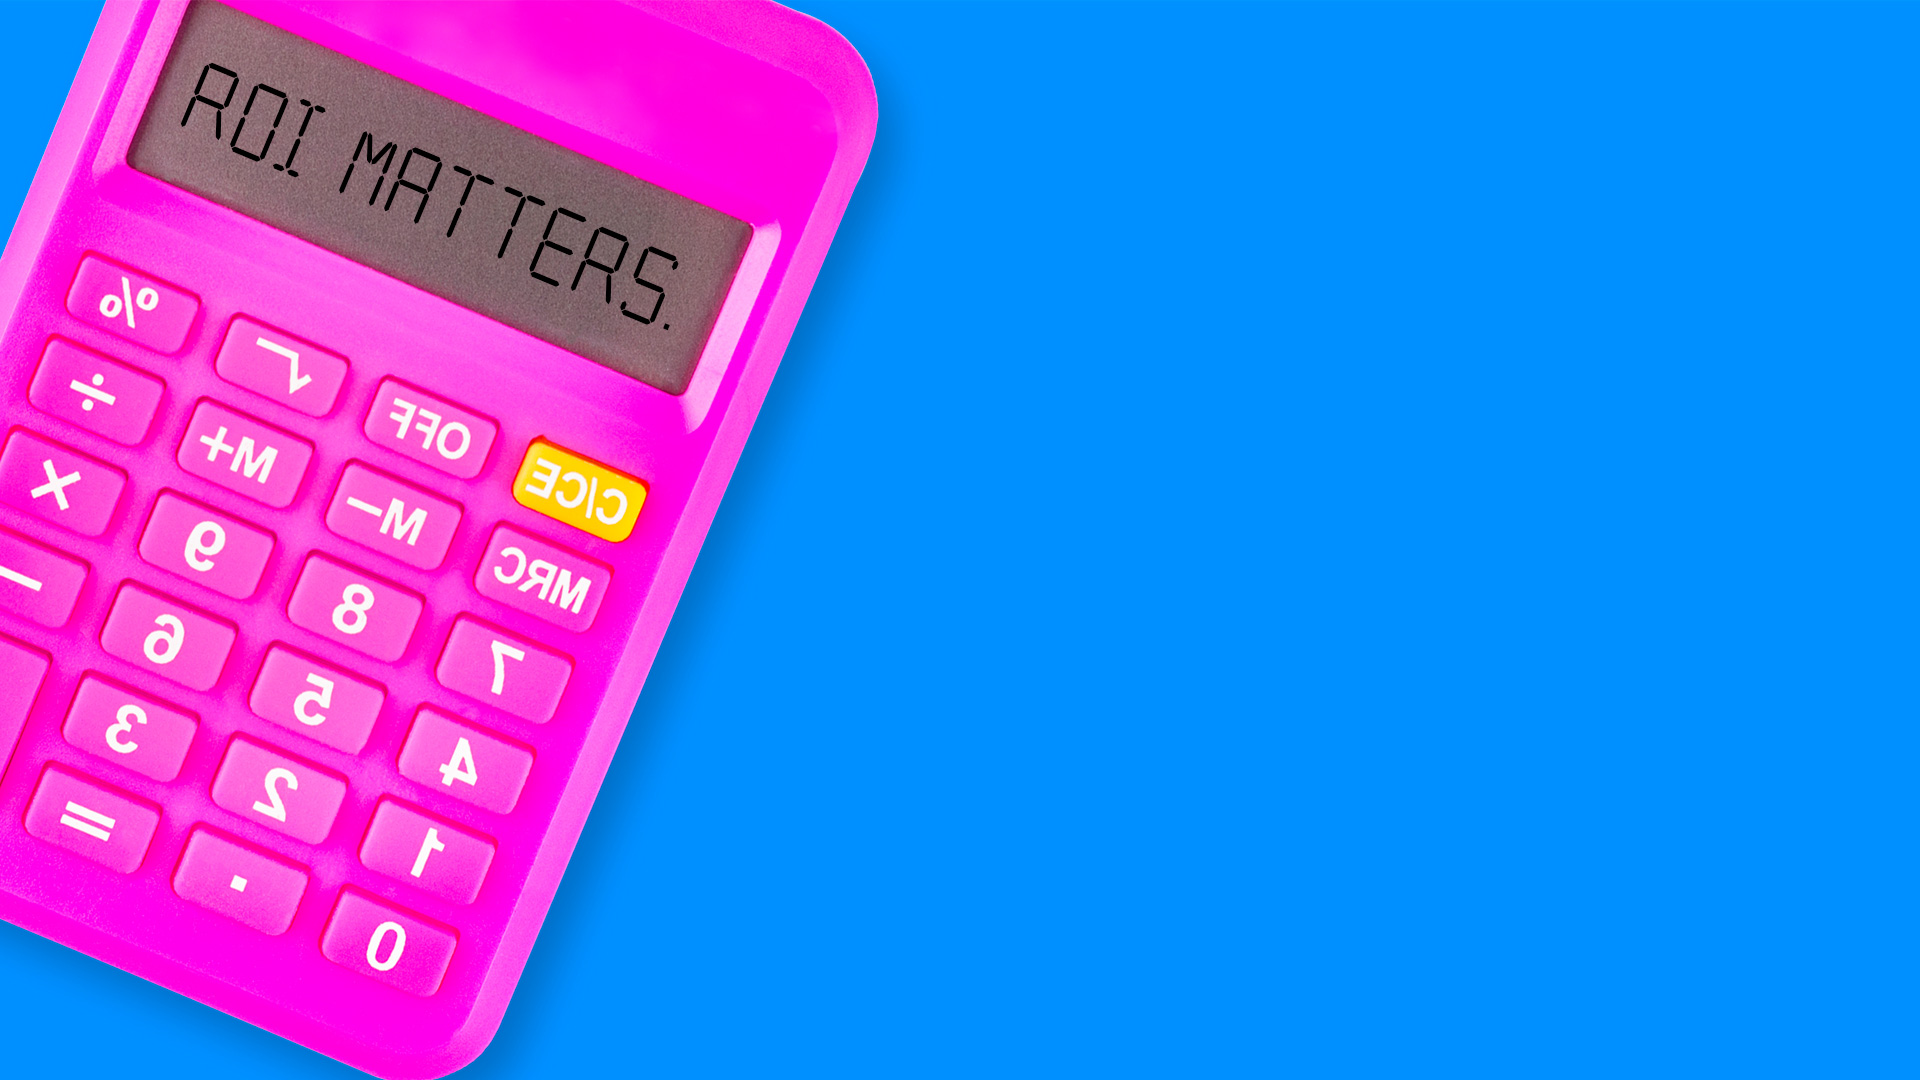 Pink calculator with "ROI MATTERS" on screen, blue background.